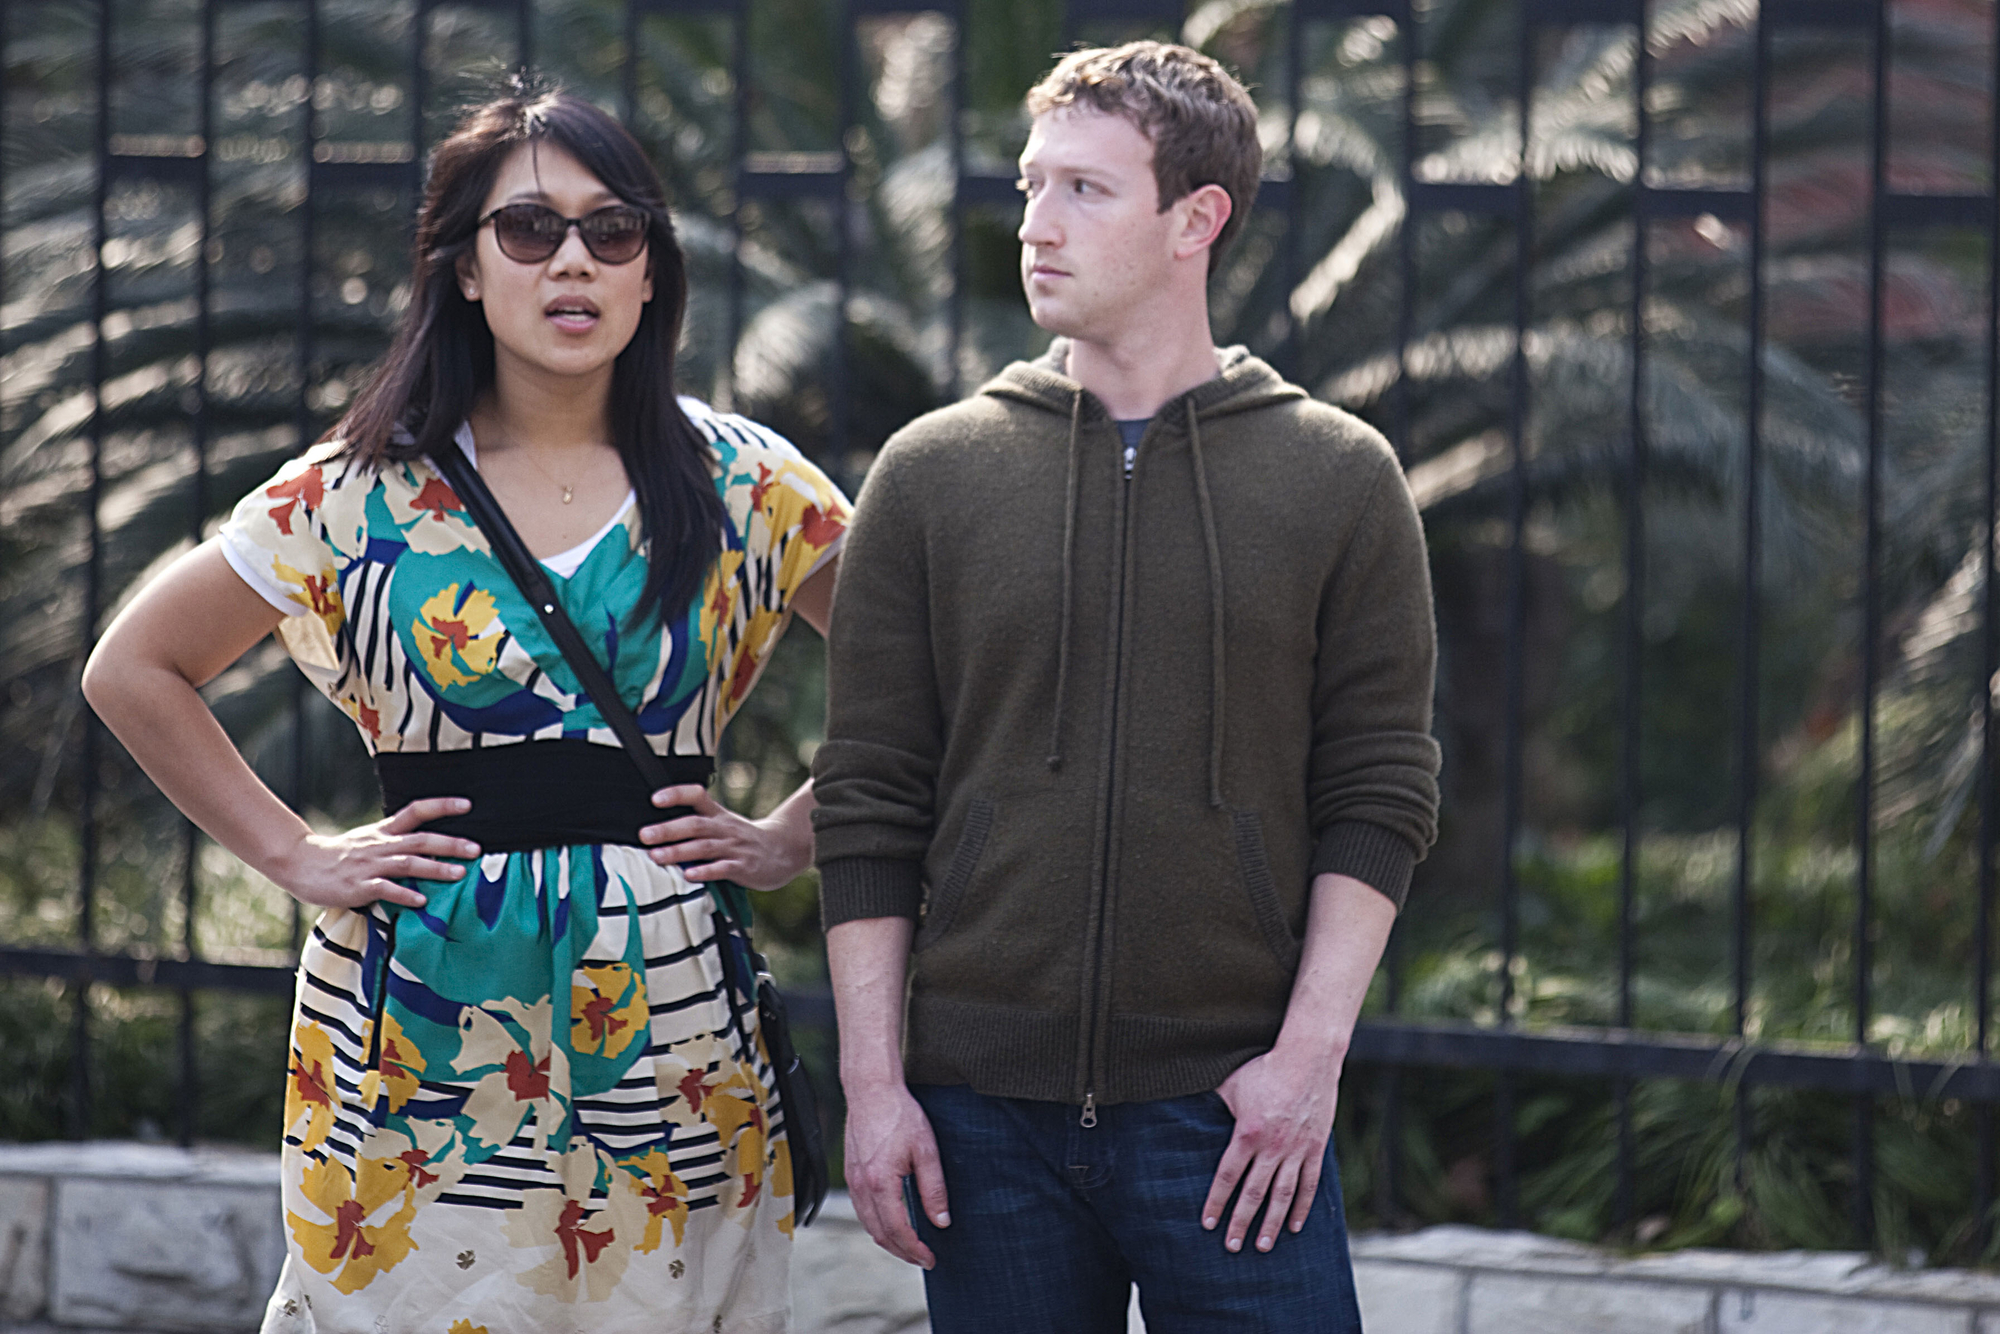 Mark Zuckerberg, founder and CEO of Facebook, is pictured with his girlfriend Priscilla Chan on a street in Shanghai, China, 27 March 2012. Facebook CEO Mark Zuckerberg was spotted with his girlfriend Priscilla Chan in Shanghai Tuesday (27 March 2012), leading to speculation that the online social network might be looking for business opportunities in China, the worlds largest internet market. According to inside rumor, Mark Zuckerberg and Apple CEO Tim Cook flew together with a private jet on their trip to China.